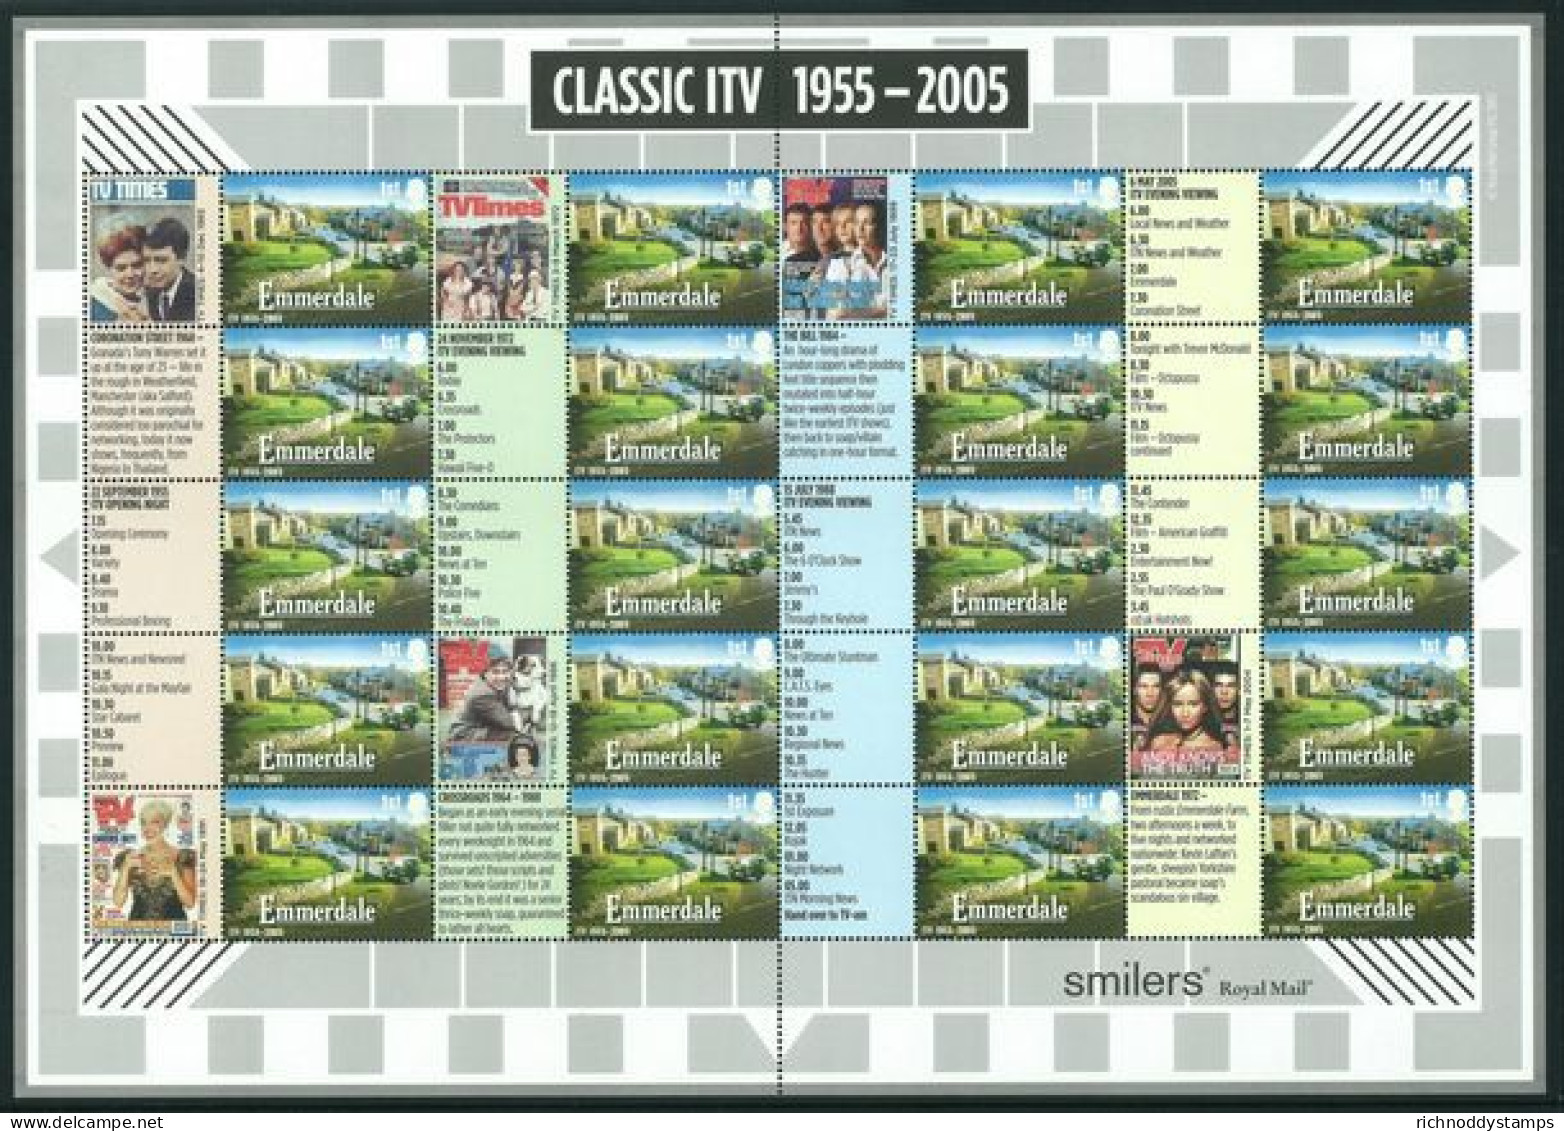 2005 Classic ITV Smilers Sheet Unmounted Mint.  - Smilers Sheets